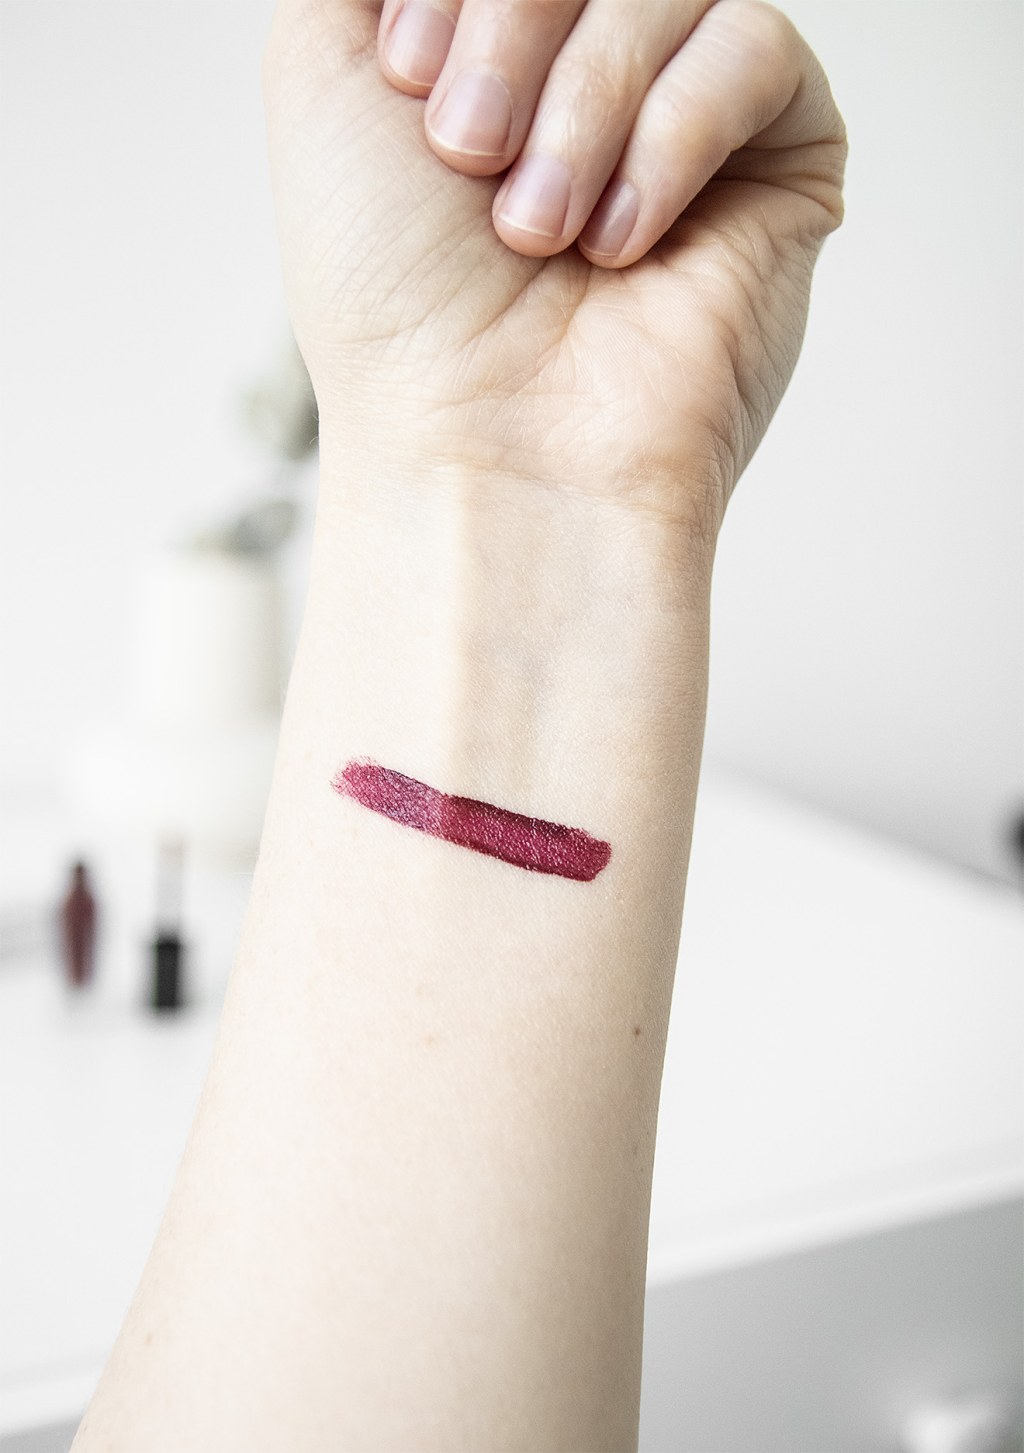 Picture of: Johnny Concert Maudit Matte Long-Lasting Mad Moiselle Lipstick